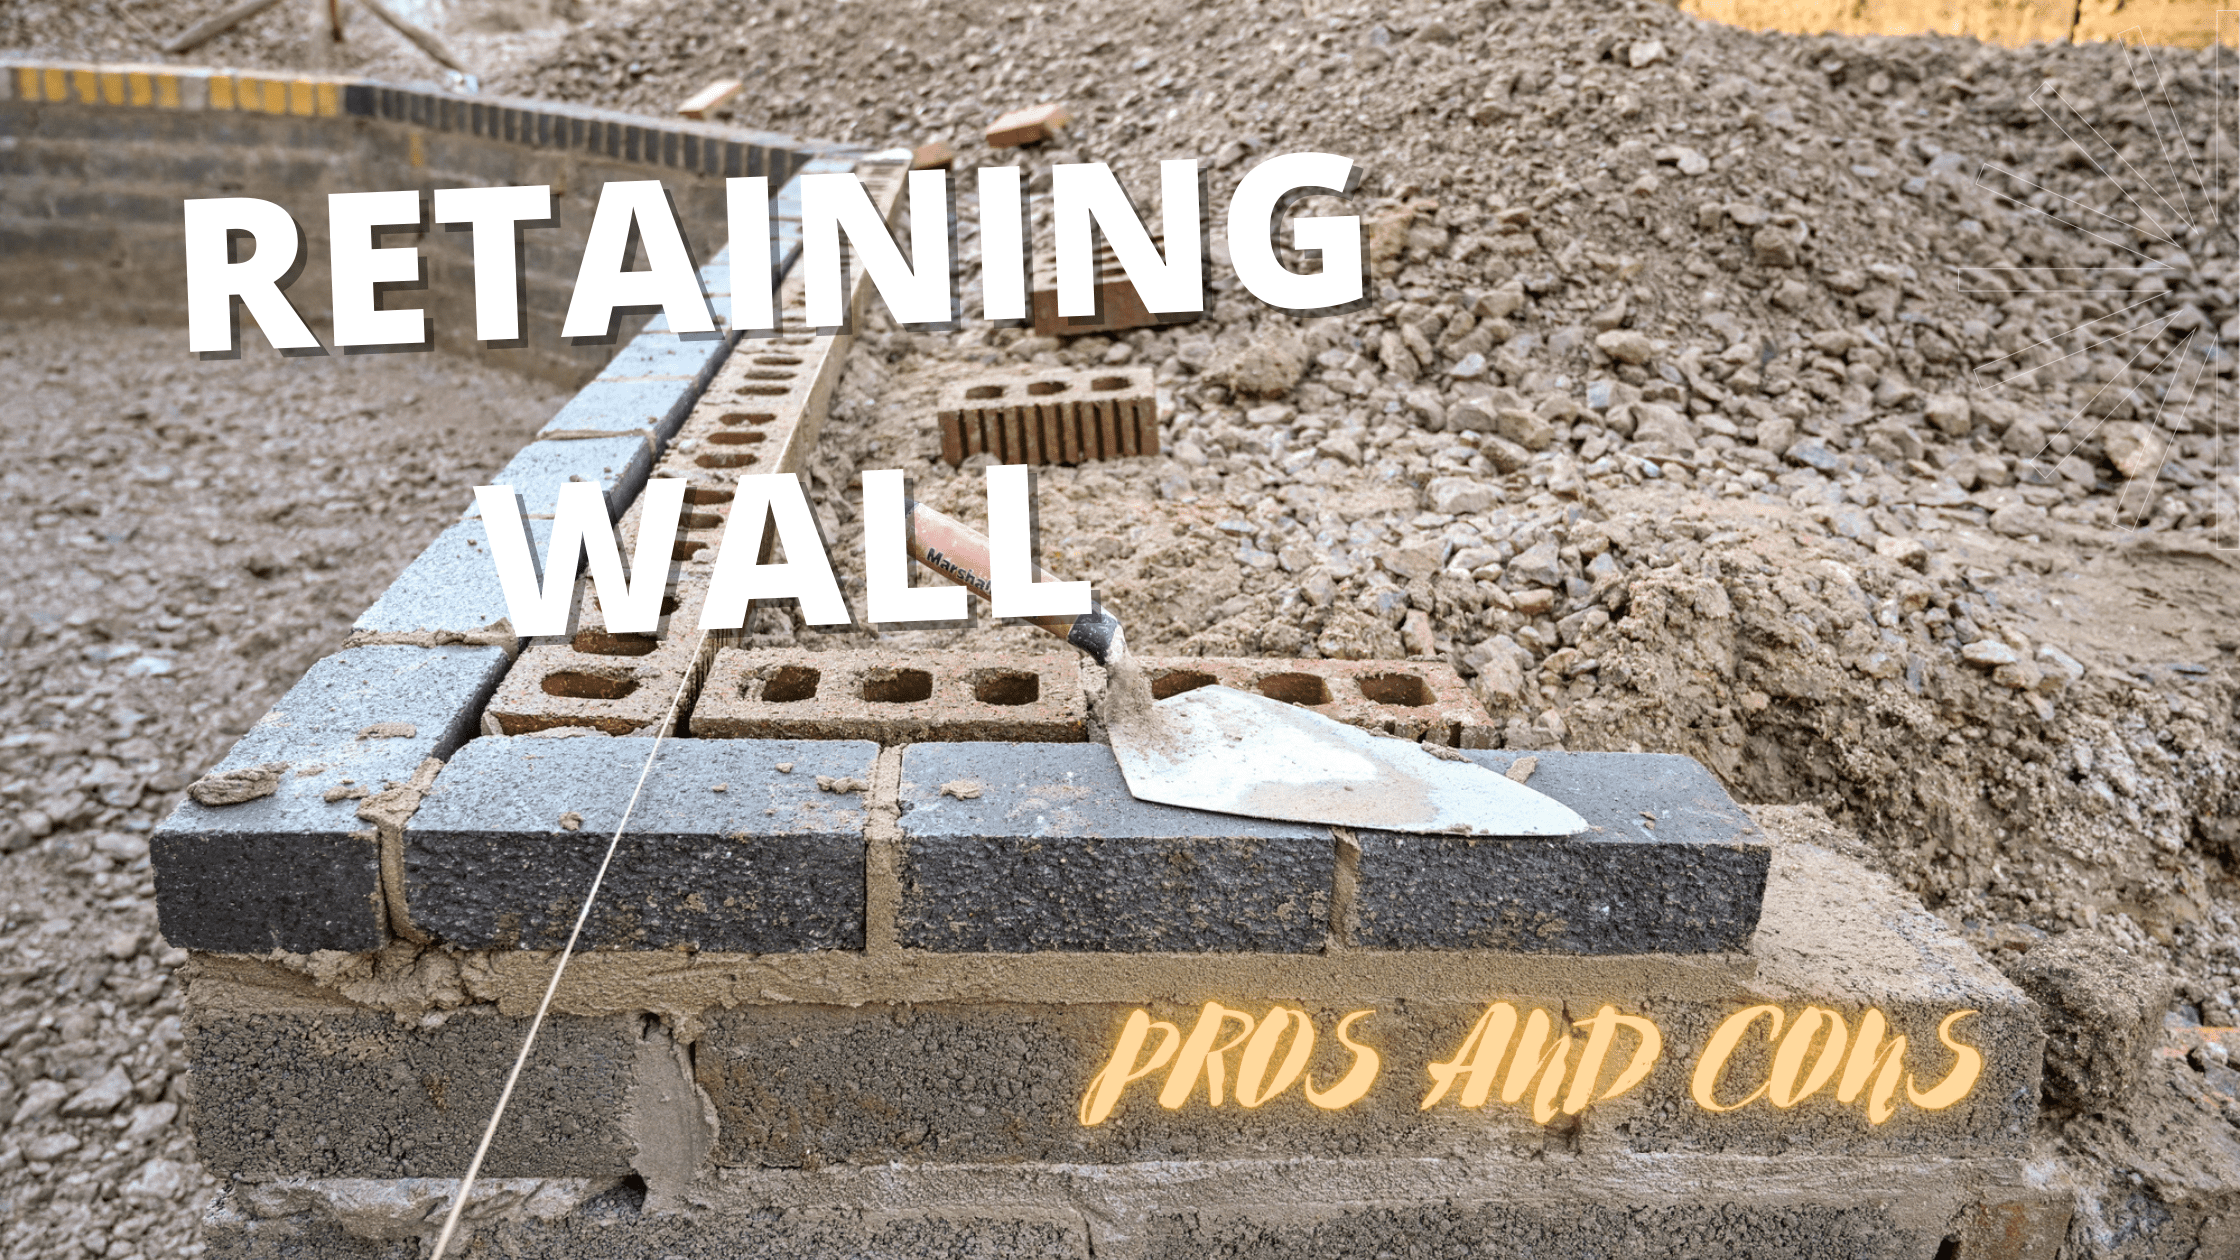 pros and cons of building the wall essay